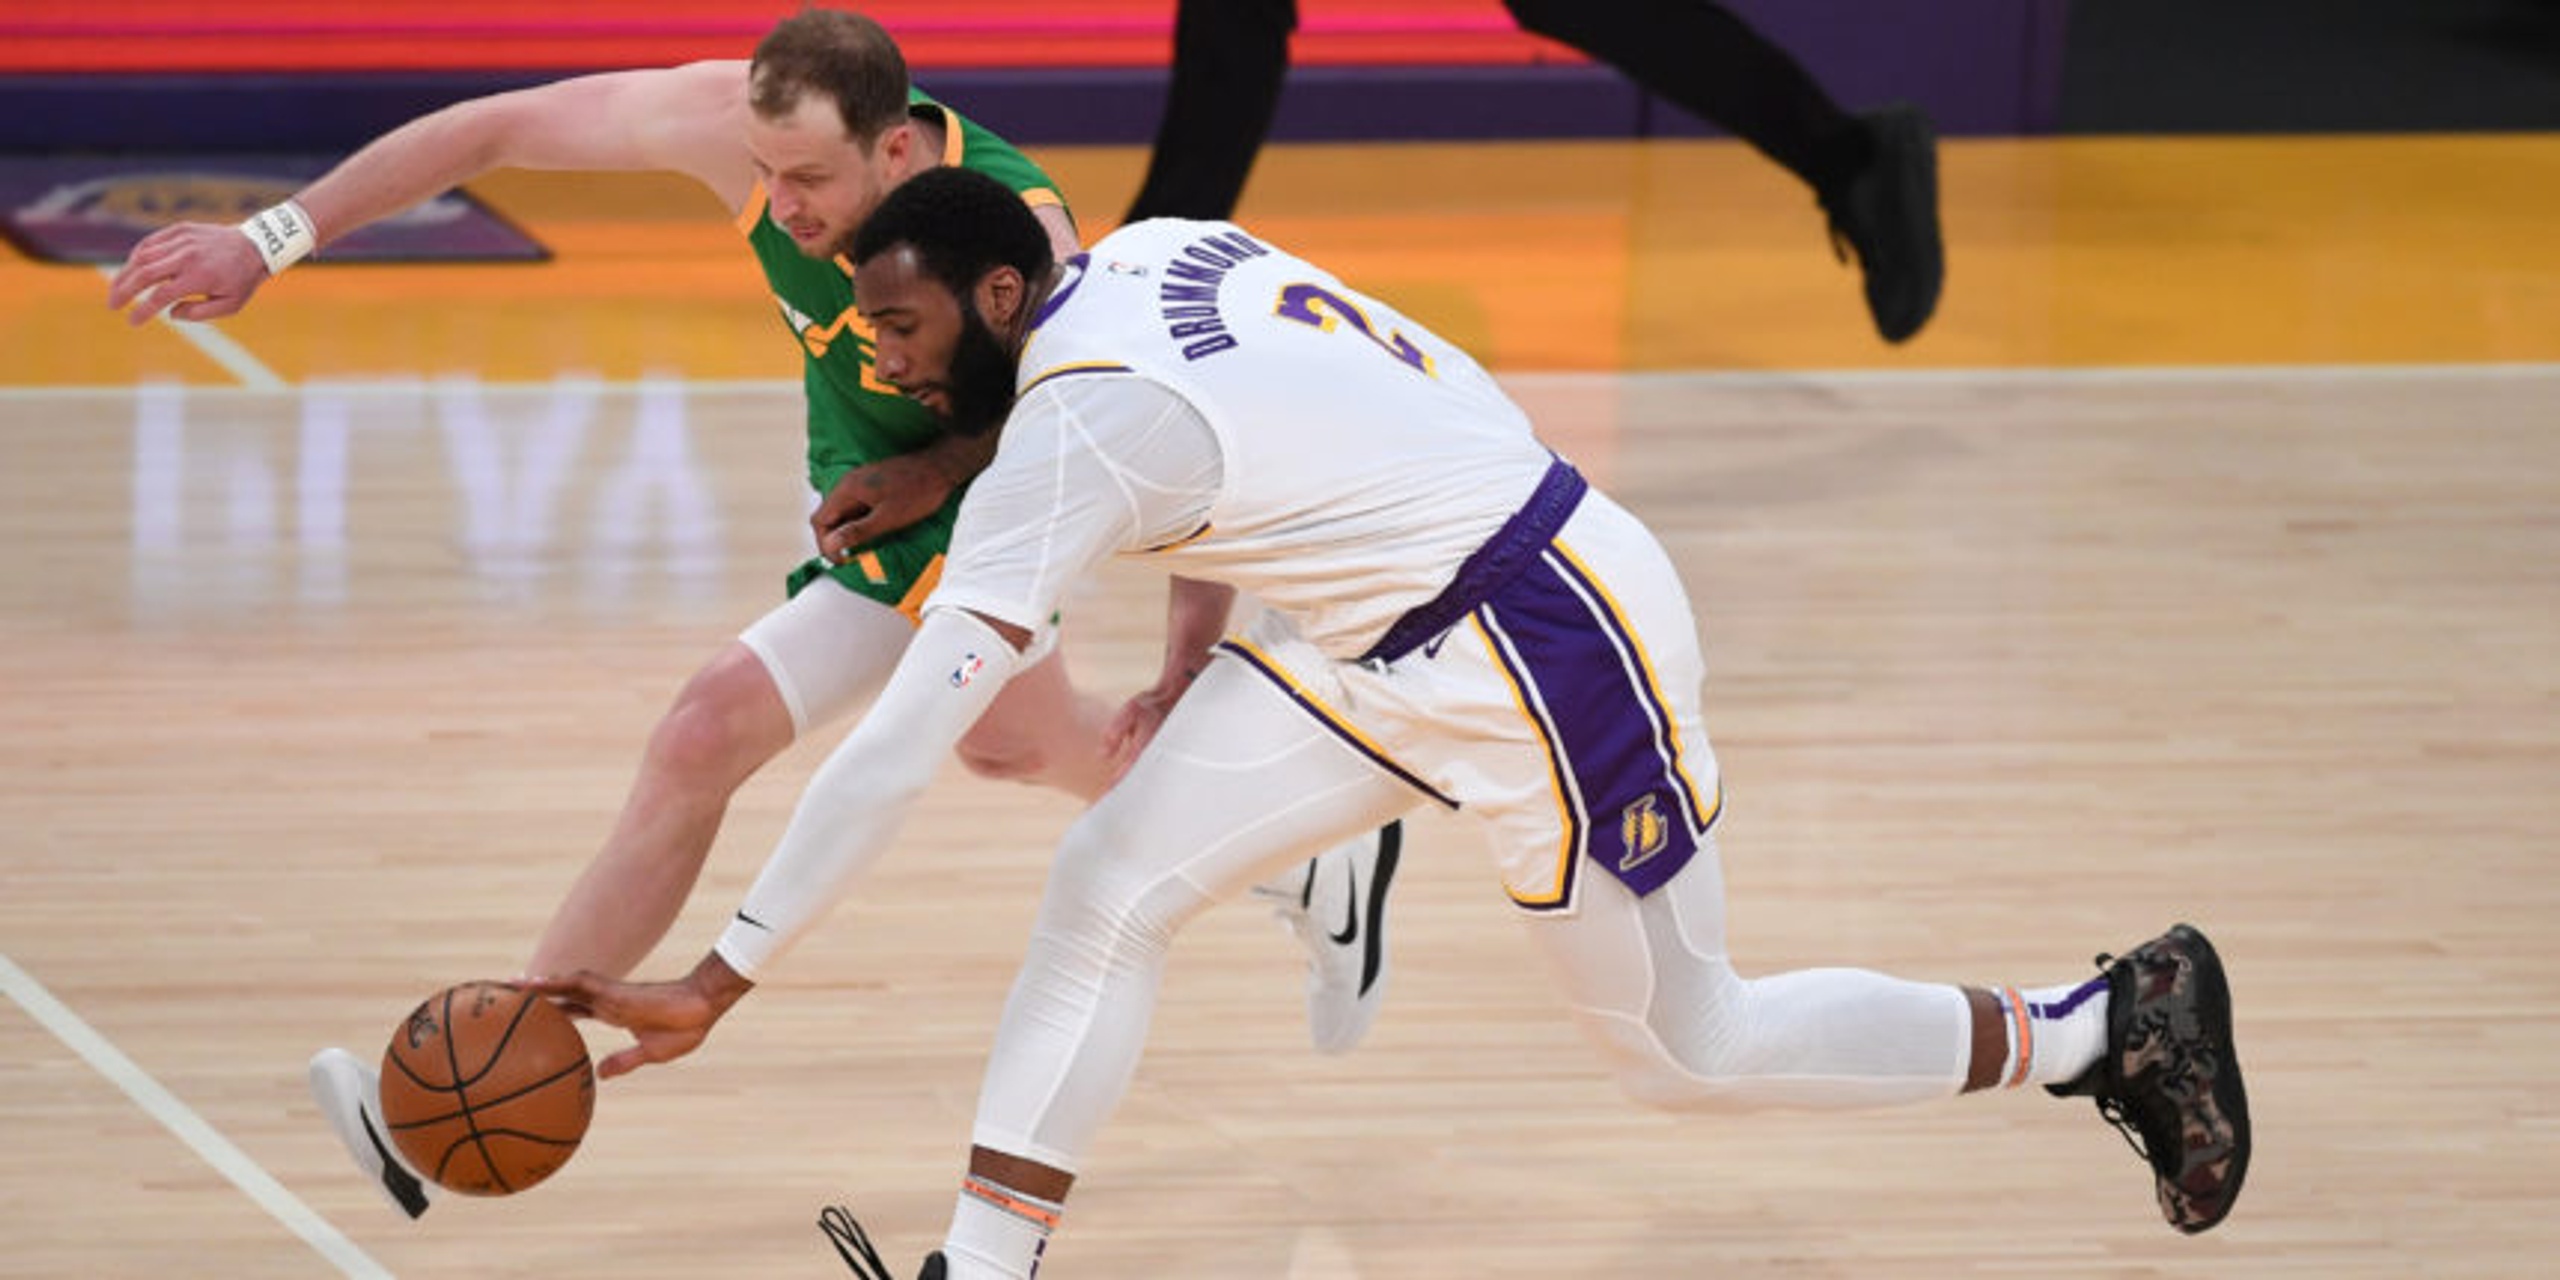 Drummond leads Lakers past Jazz: 'The chemistry is getting there'